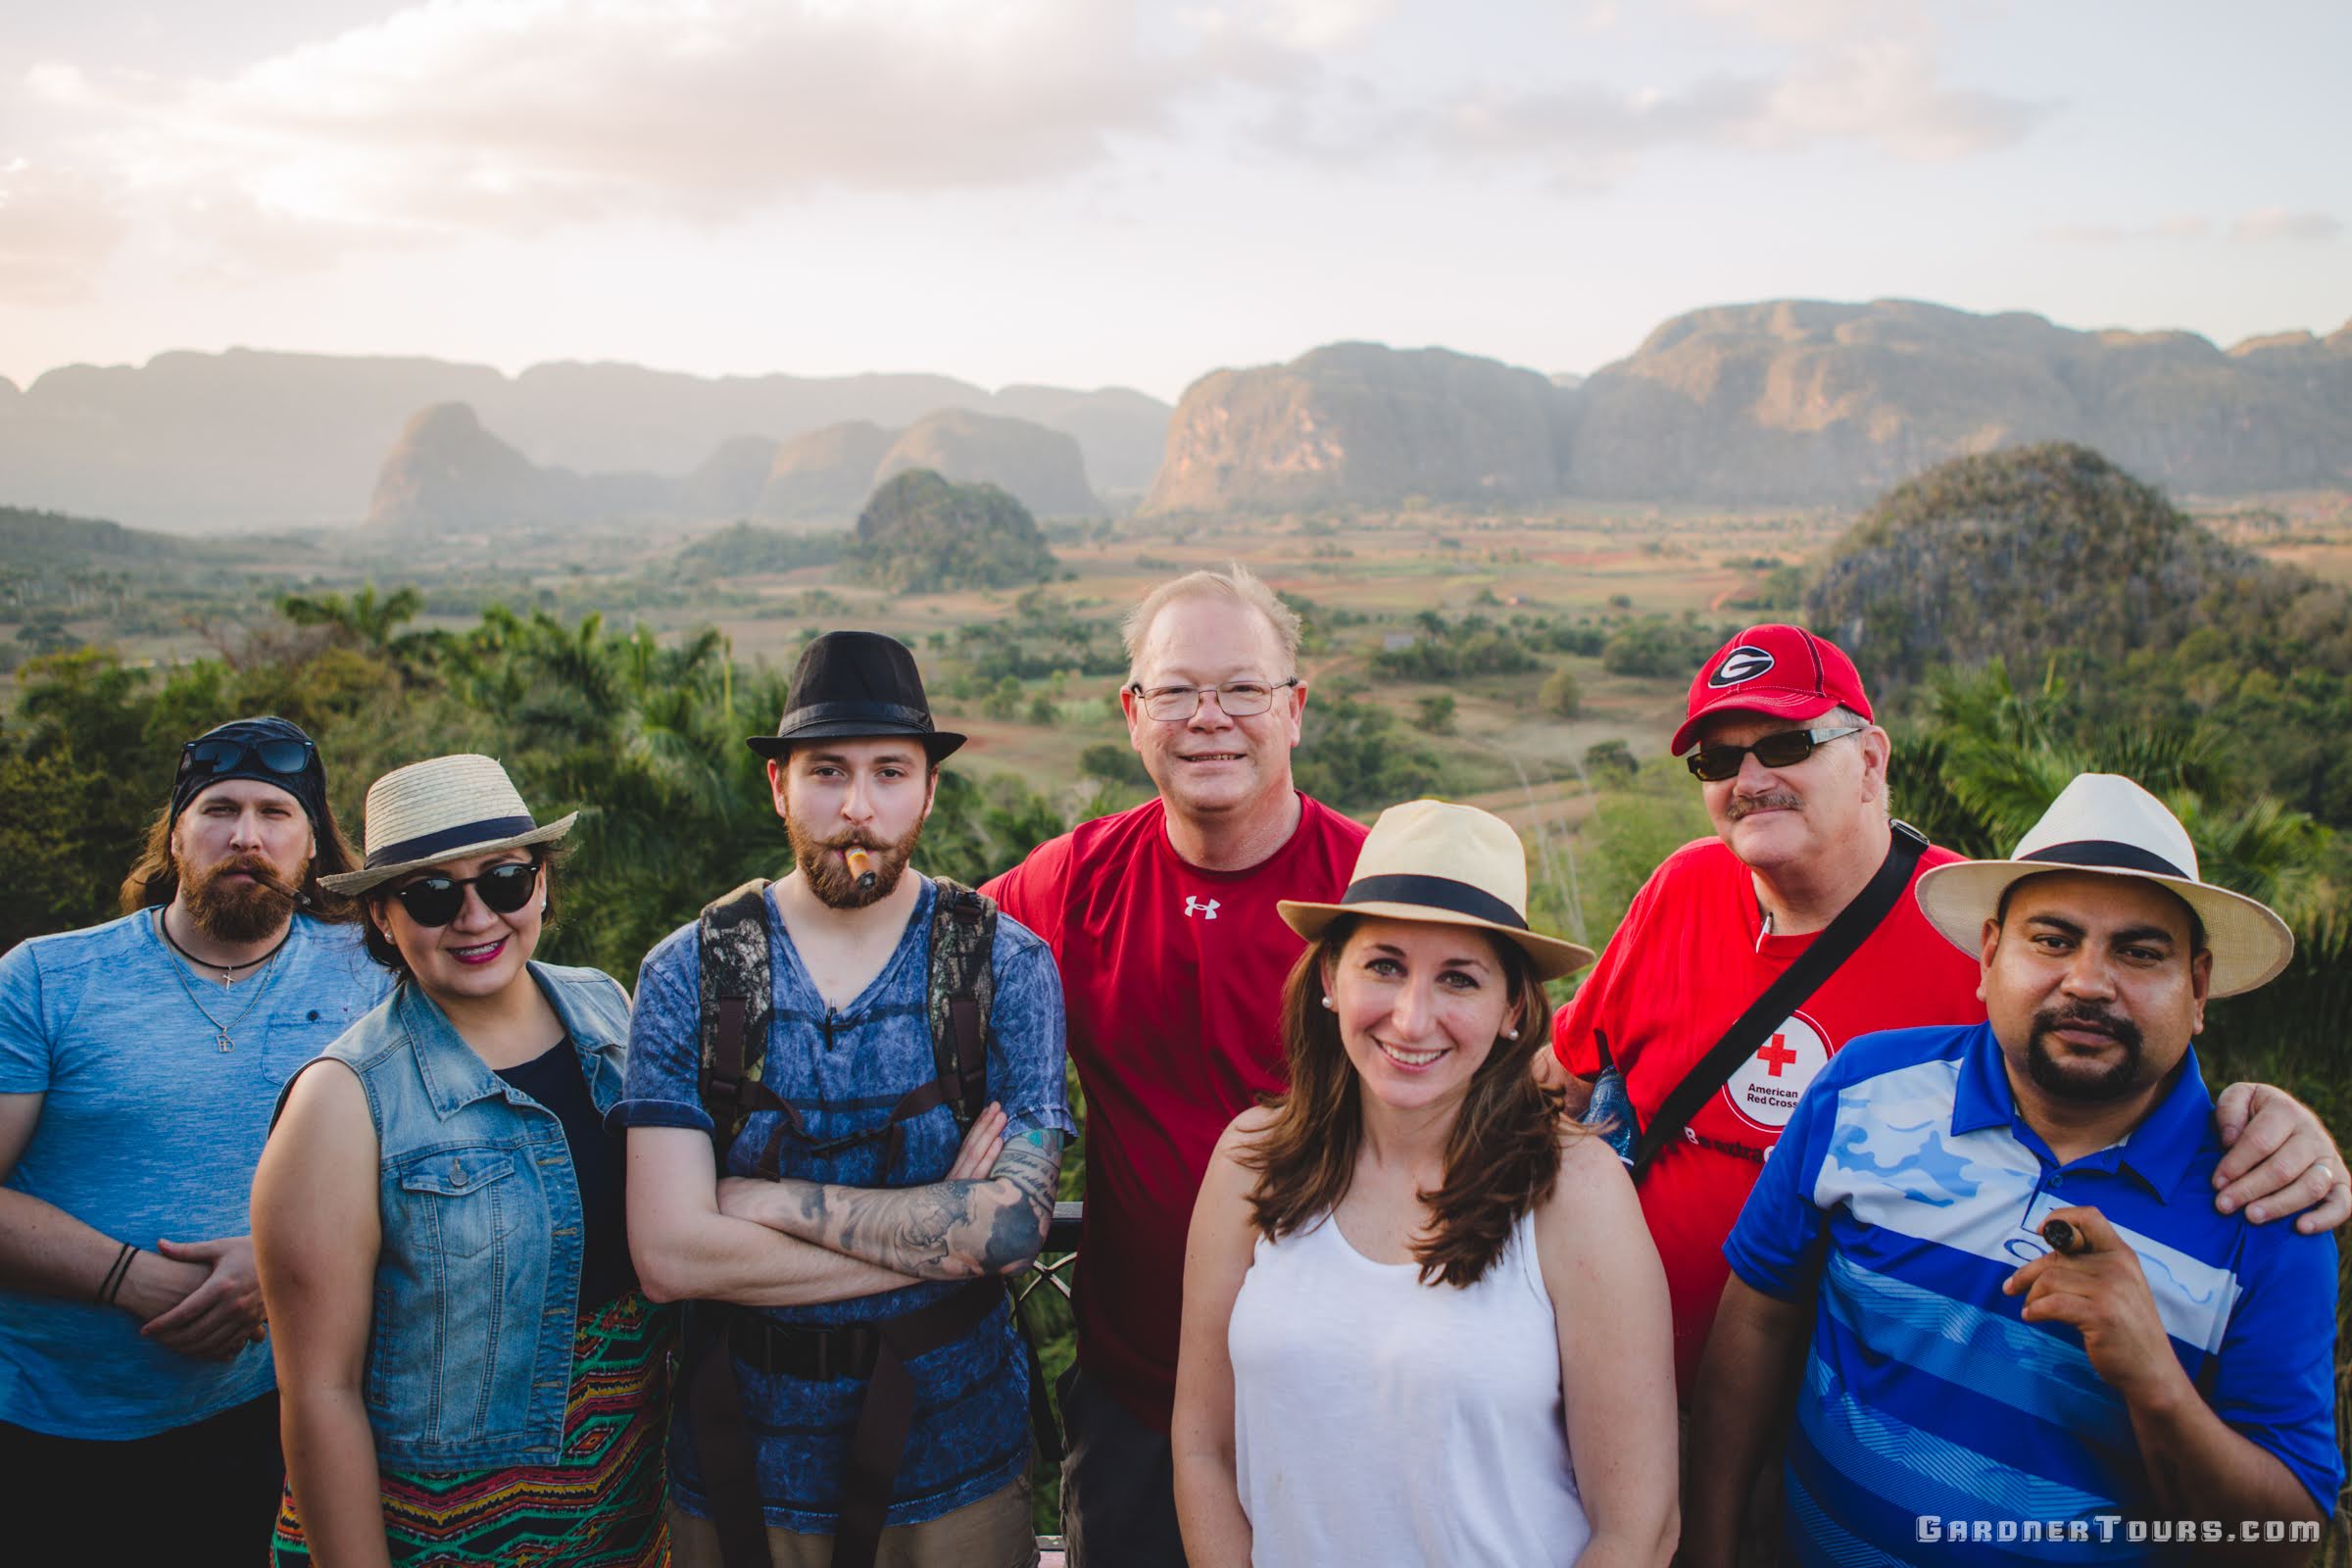 Group of Friends Smoking Cigars and Enjoying the View at the Los Jazmines Hotel Viewpoint overlooking the Vinales Valley in Cuba